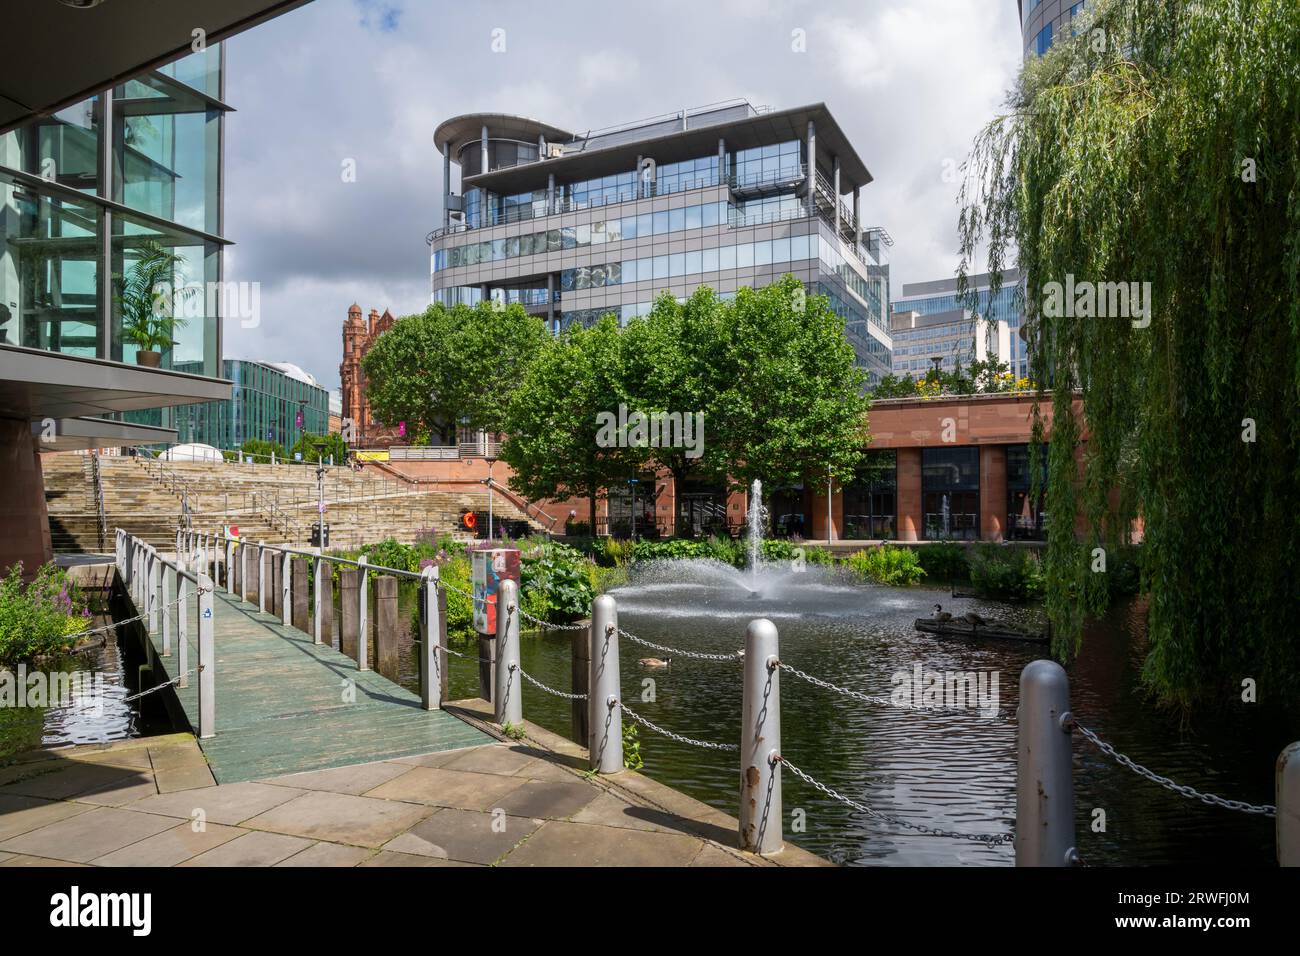 Rochdale Canal Lake situated beside the Bridgewater Hall in the middle of the city of Manchester, England. Stock Photo